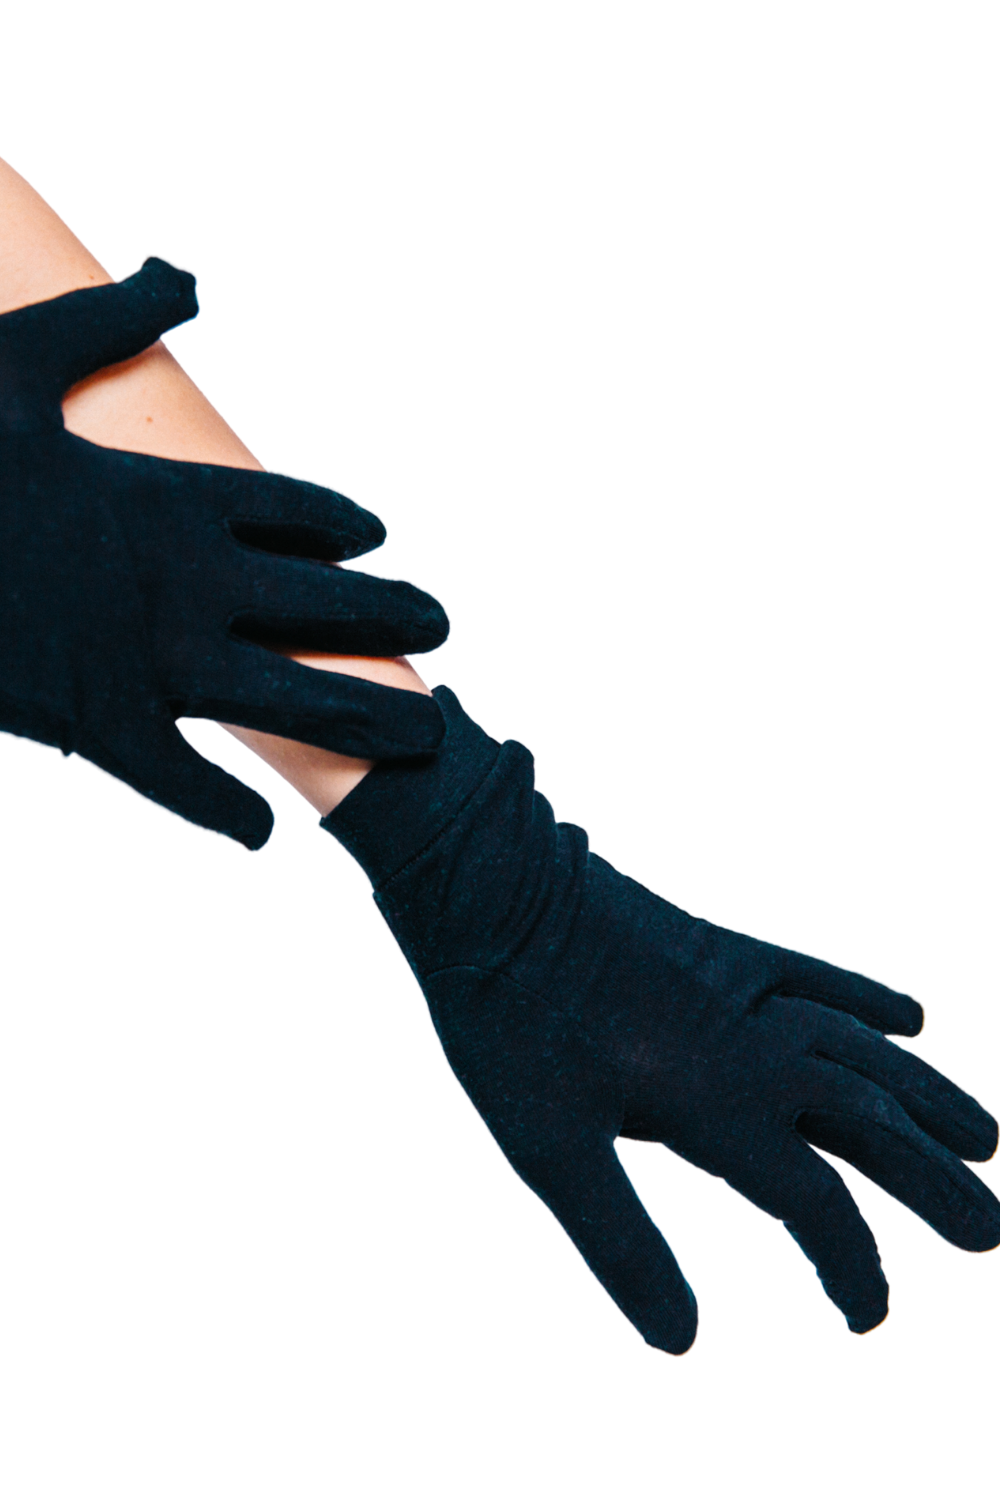 Remedywear Gloves - glove treatment for hands